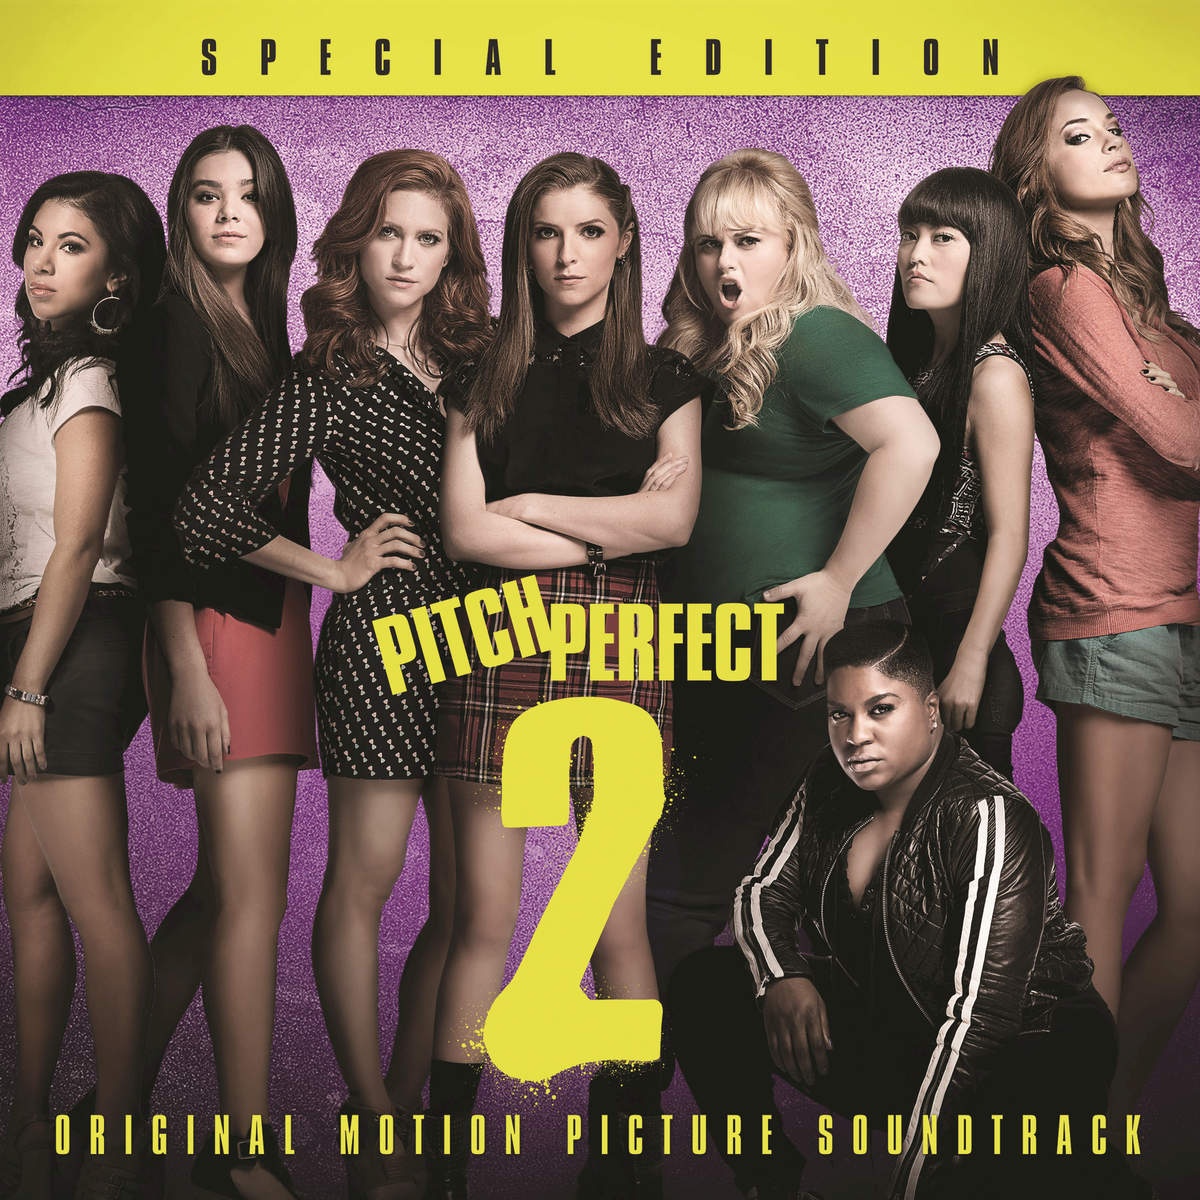 Flashlight (From "Pitch Perfect 2" Soundtrack)